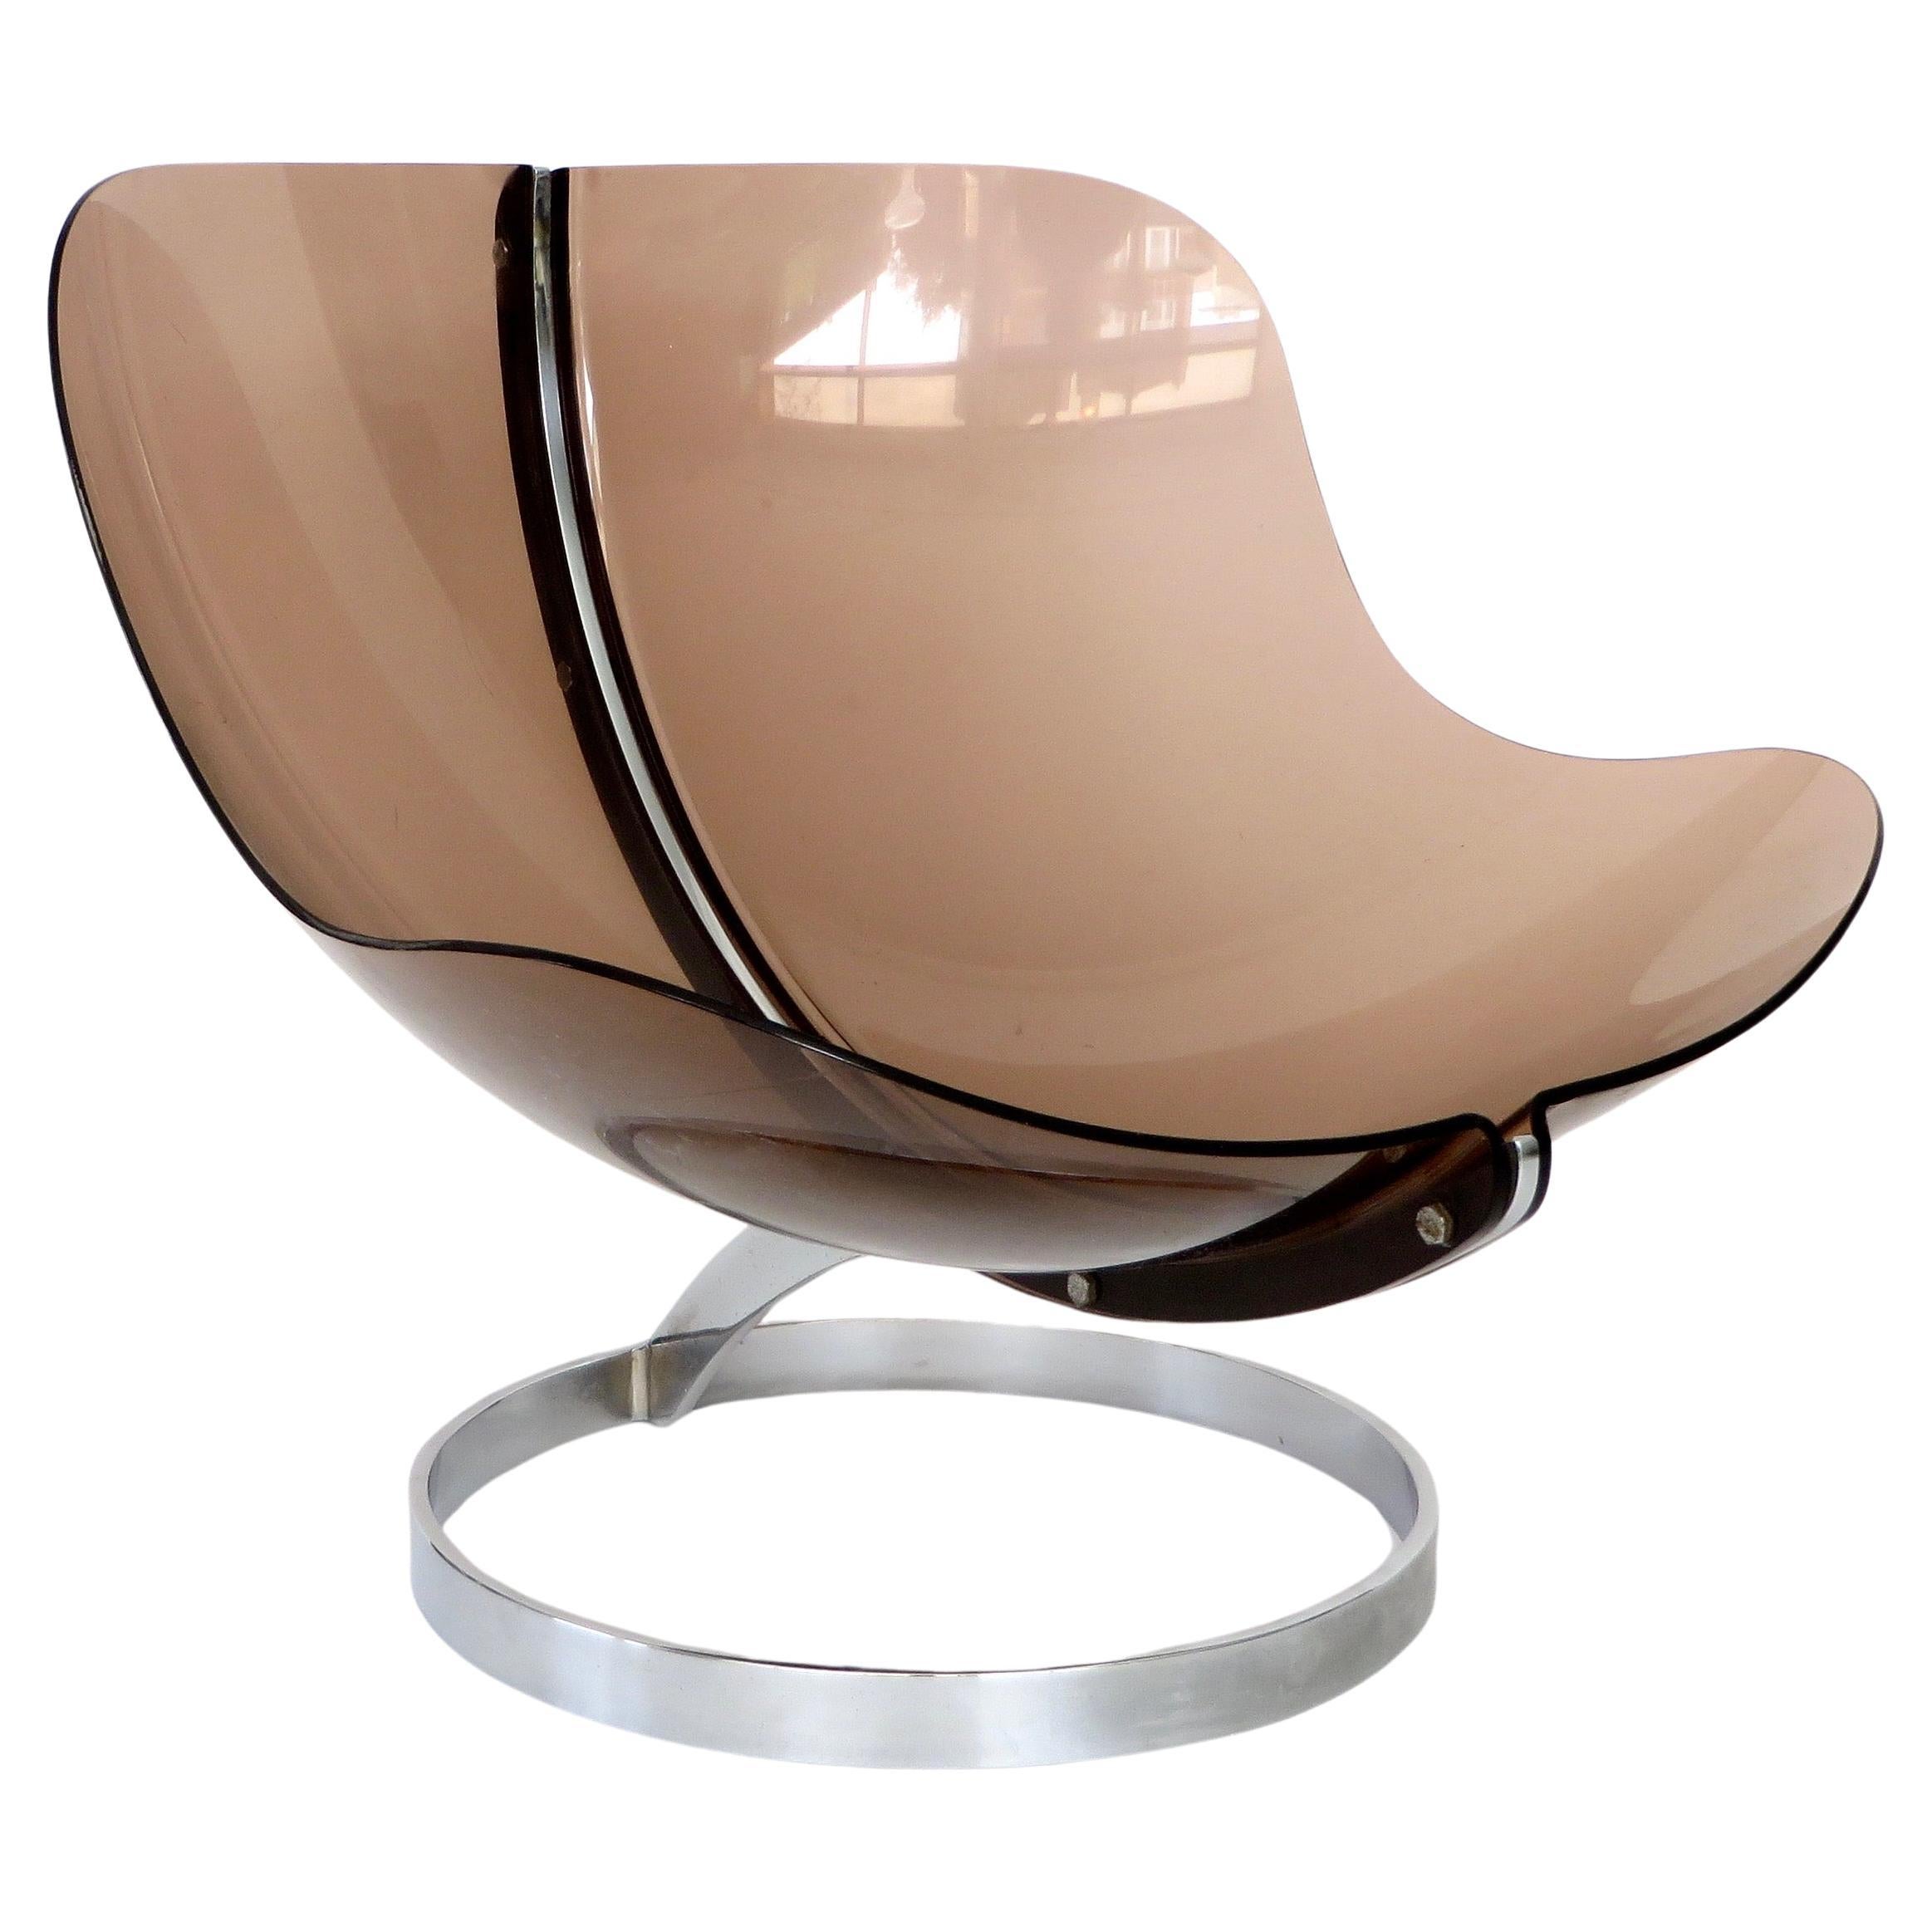 Boris Tabacoff French 'Sphere' lounge chair Edition 